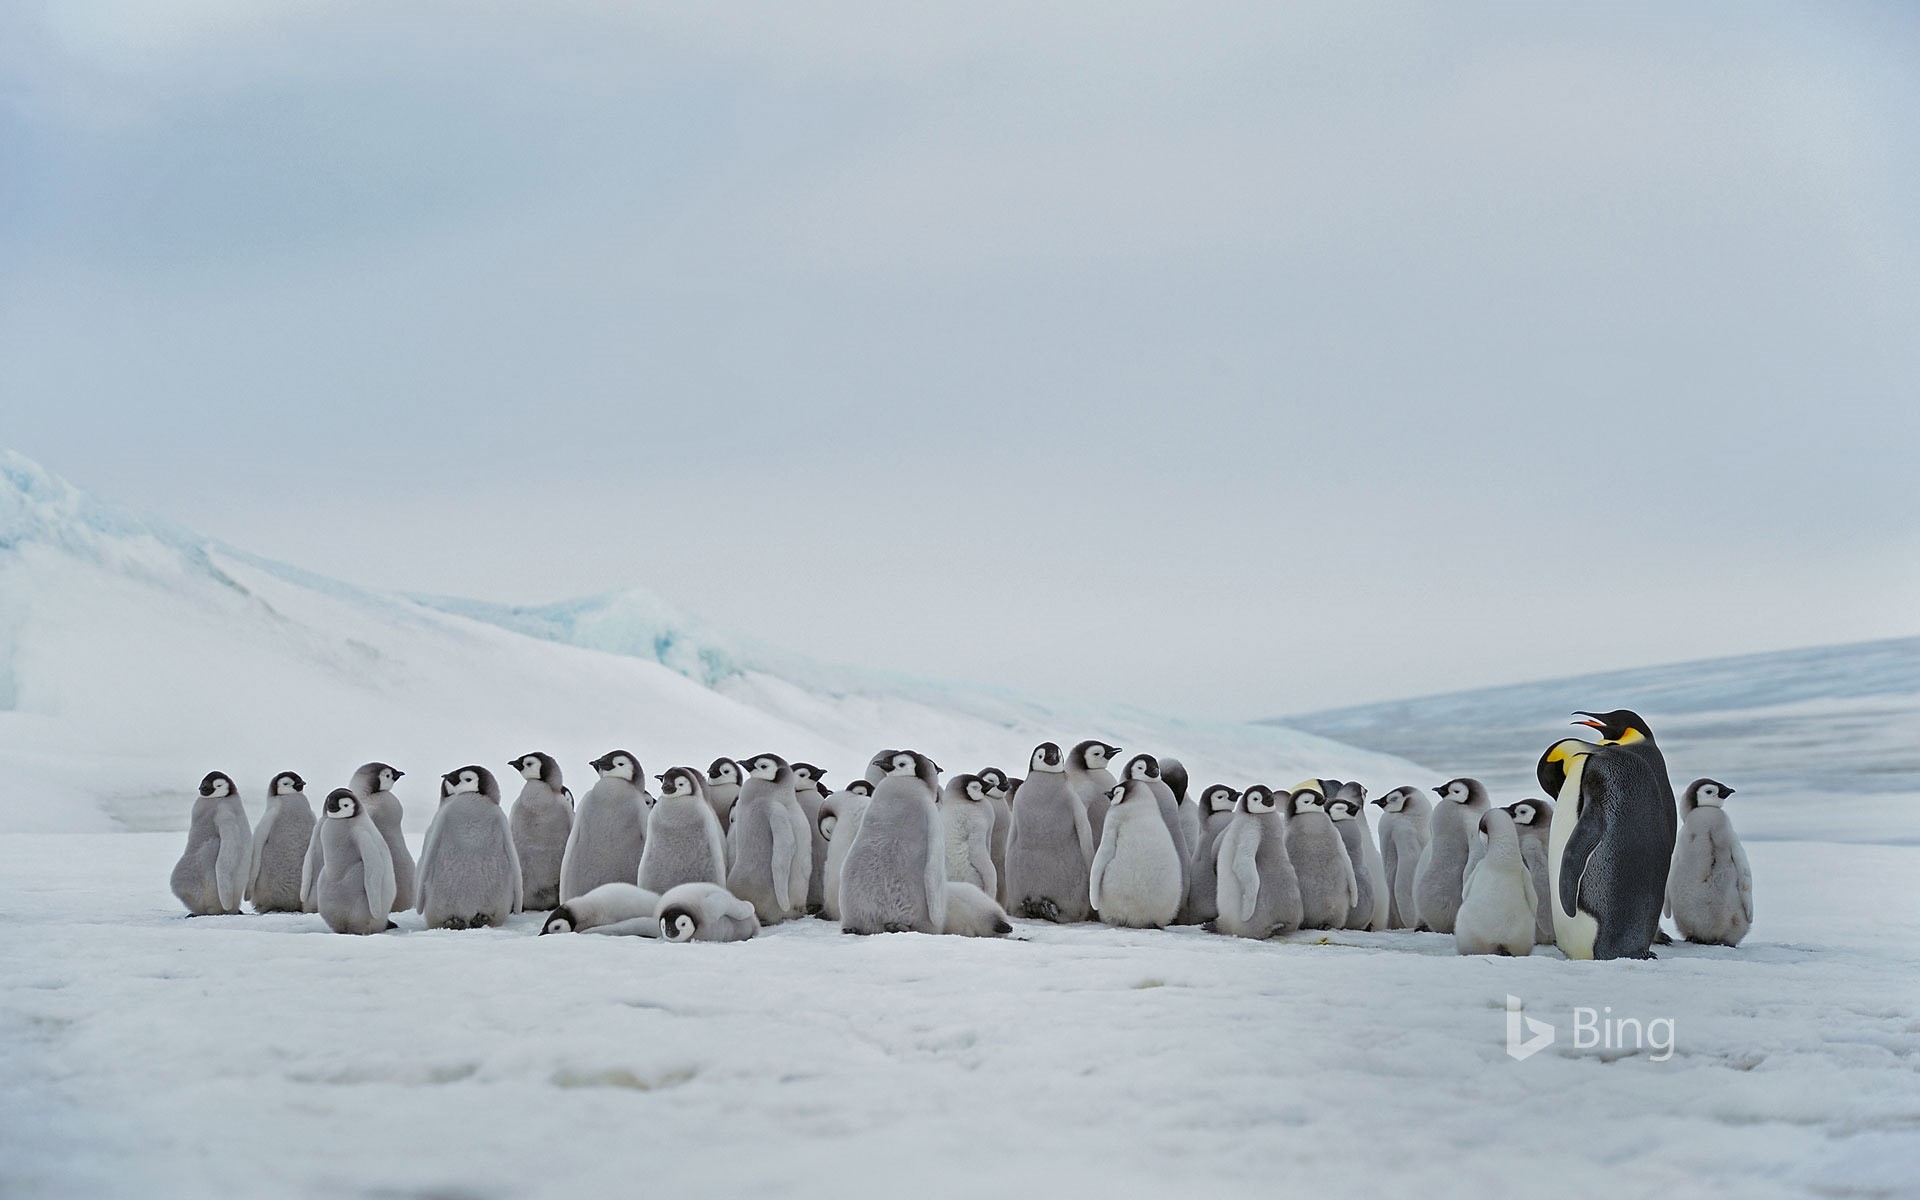 Emperor penguin adults and chicks at the Snow Hill Island rookery, Antarctica